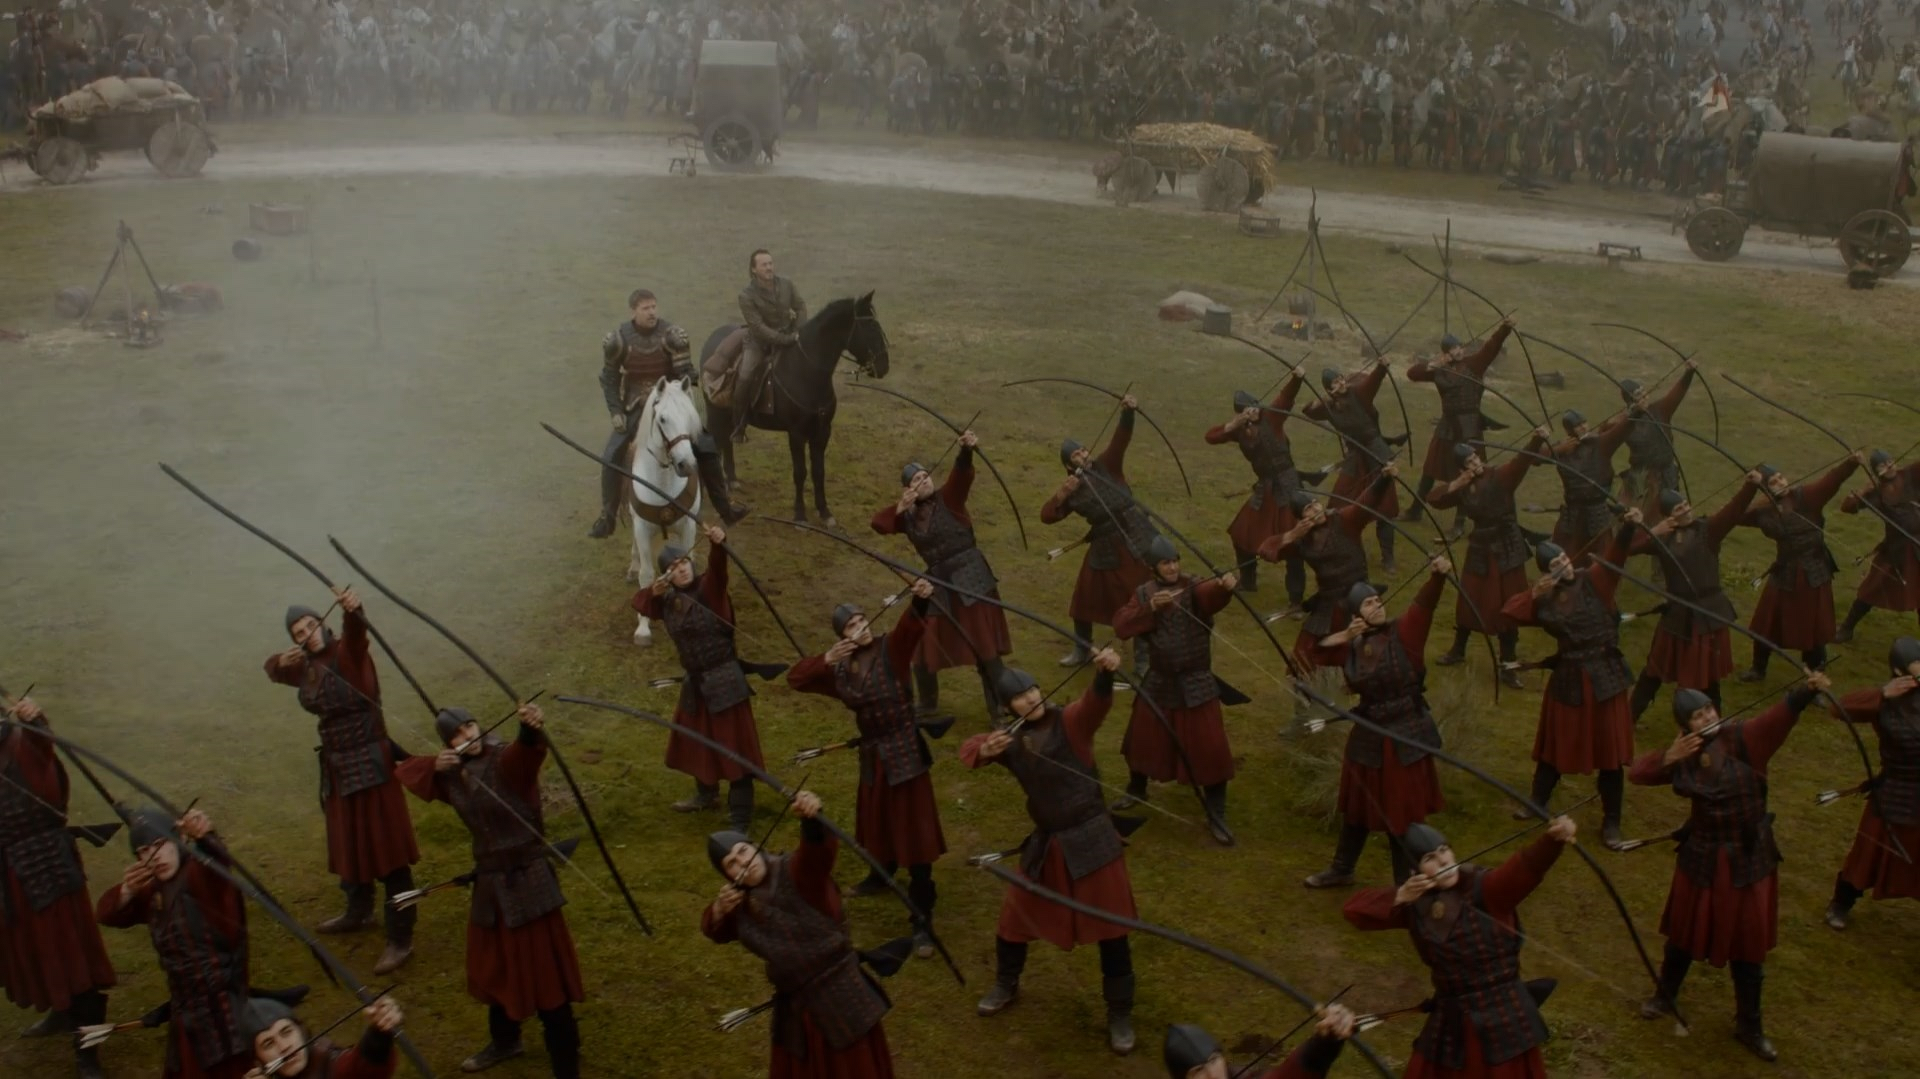 House Of The Dragon Lannister Army BATTLE 